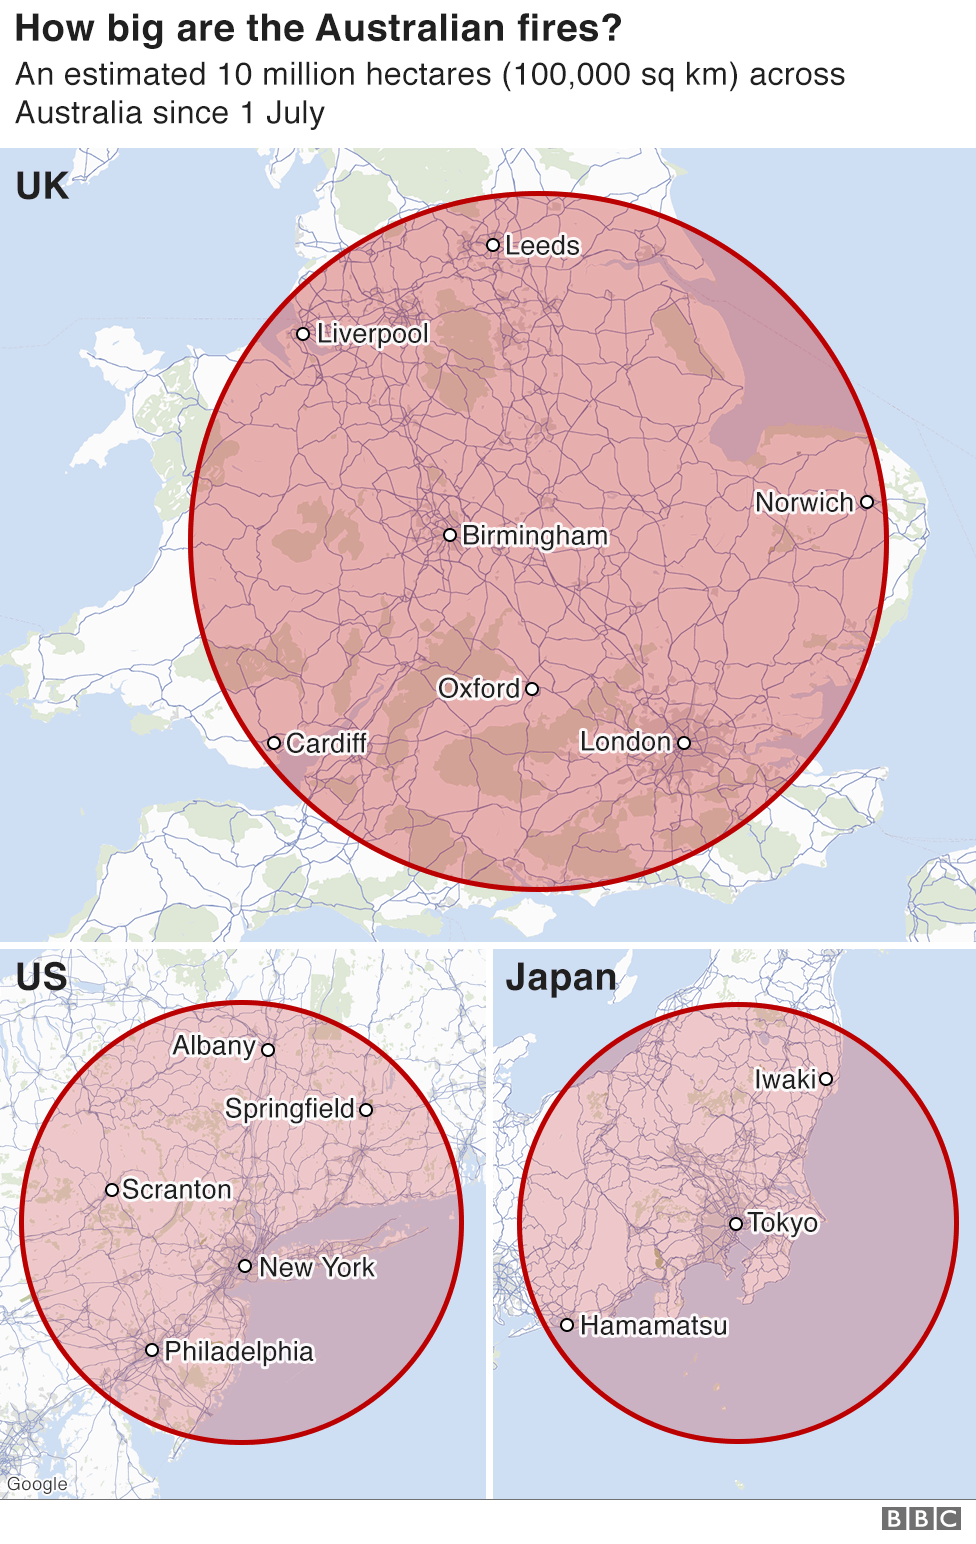 Infographic showing how big the fires are compared to the geography of the UK, the US and Japan